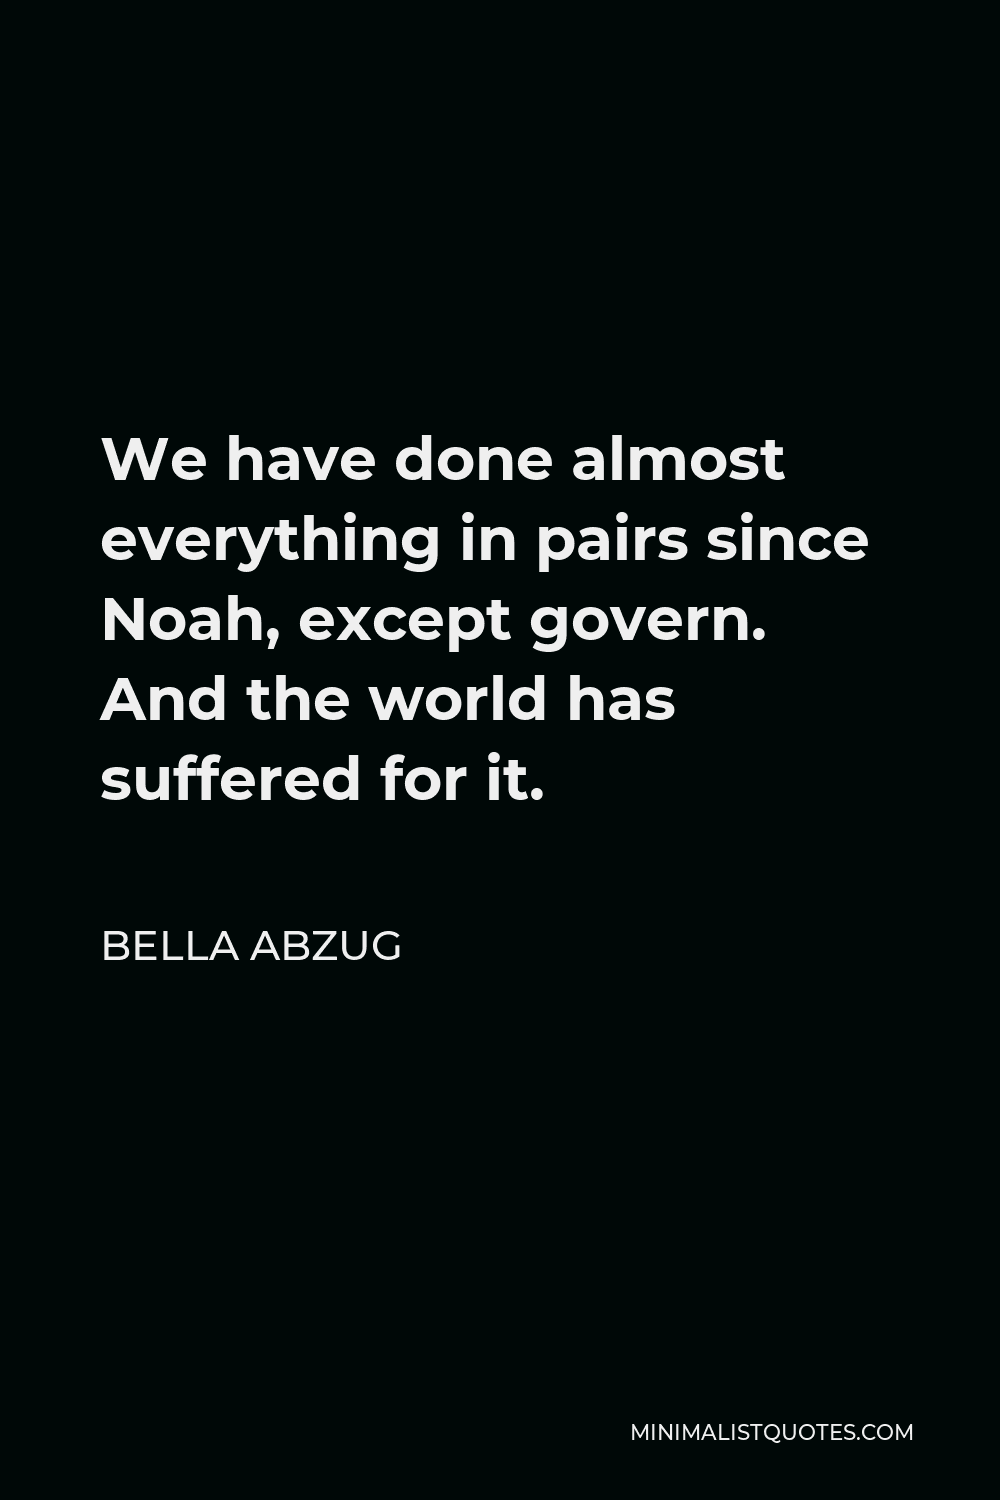 Bella Abzug Quote - We have done almost everything in pairs since Noah, except govern. And the world has suffered for it.